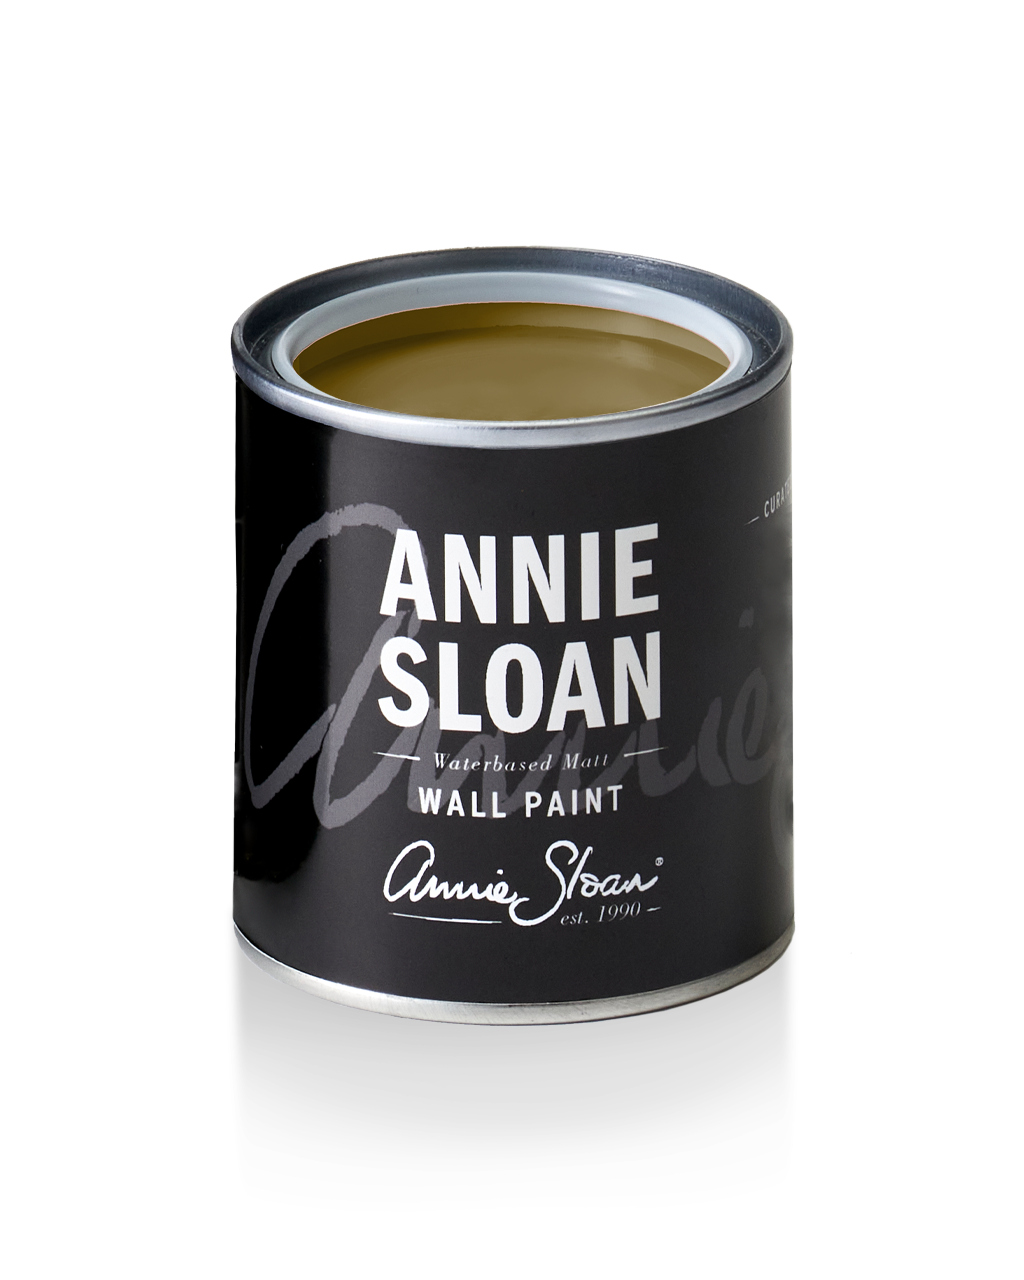 120ml tin of Olive wall paint by Annie Sloan